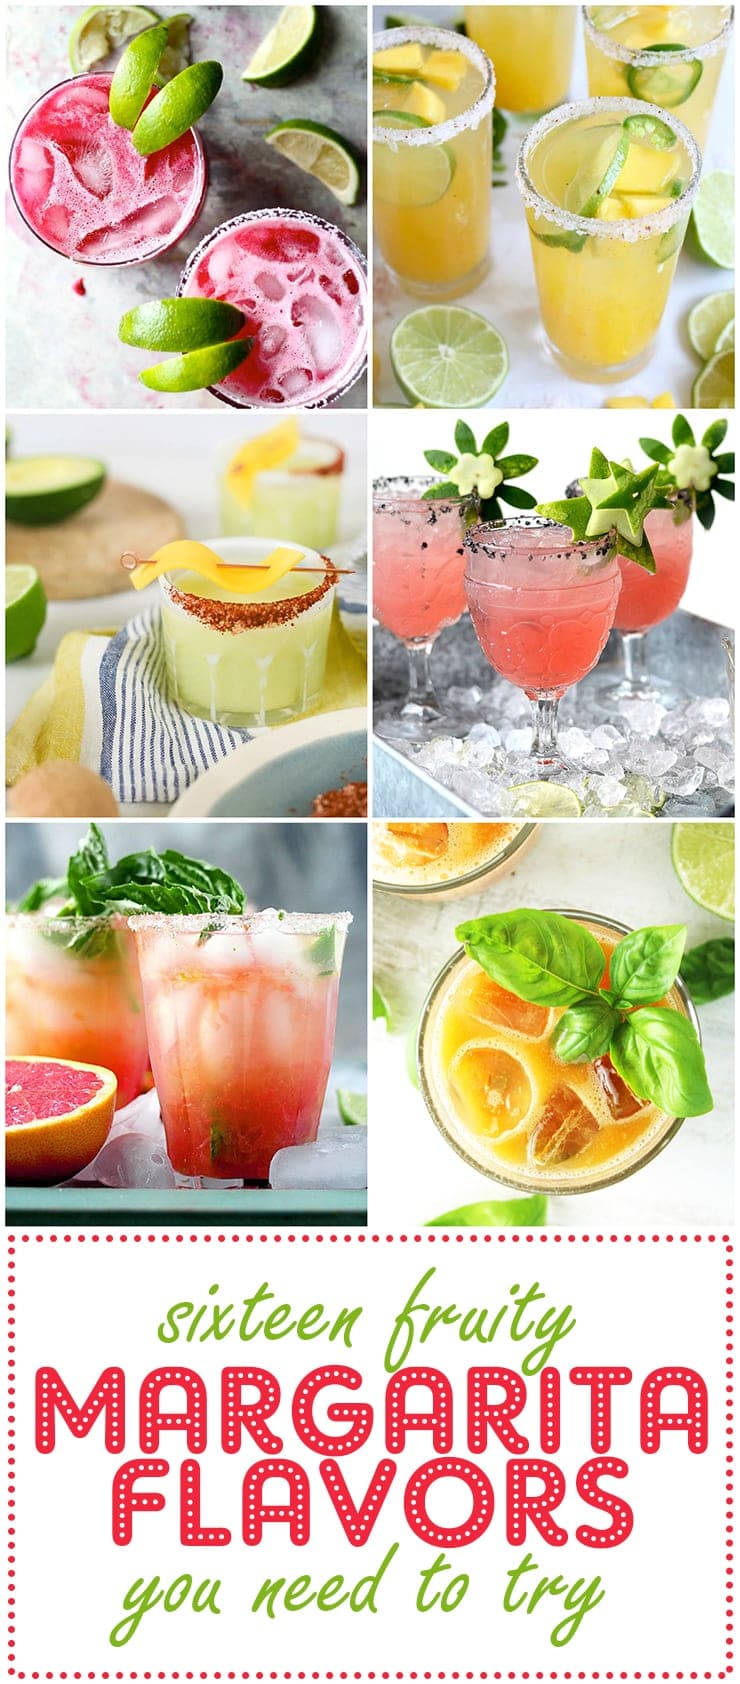 16 Margarita Flavors You Need To Try 1 - 16 Fruity Margarita Flavors You Need to Try